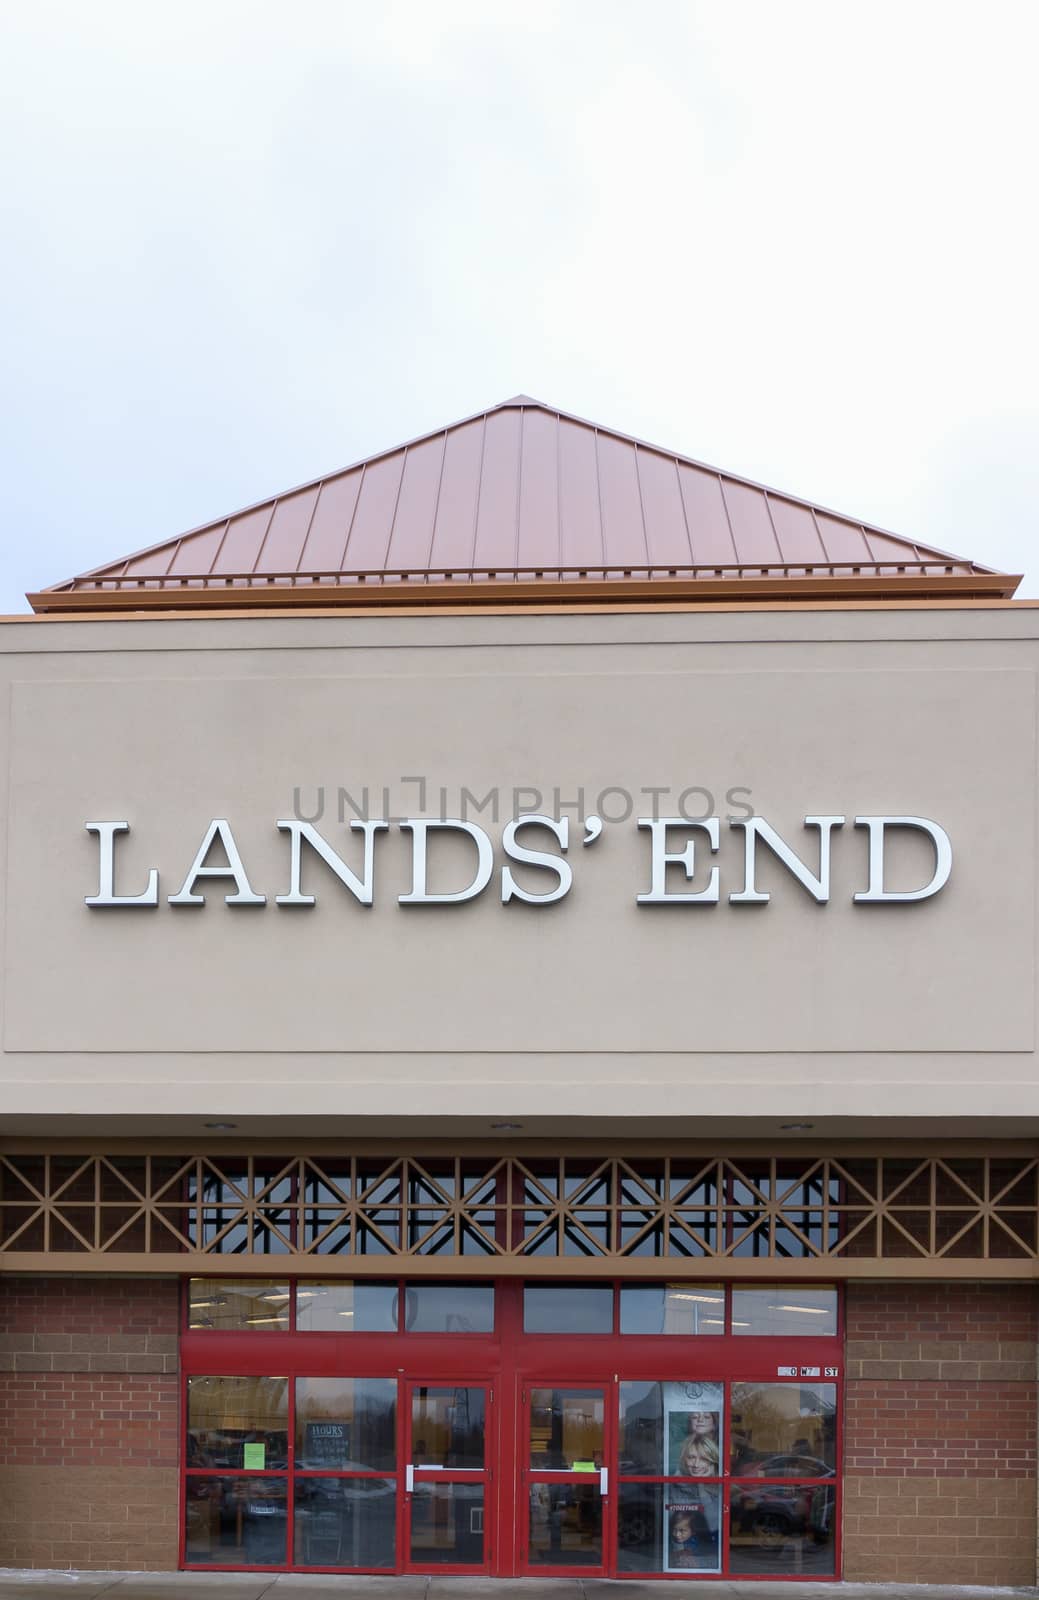 RICHFIELD, MN/USA - JANUARY 17, 2015: Land's End retail store exterior. Lands' End is an American clothing retailer that specializes in casual clothing, luggage, and home furnishings.